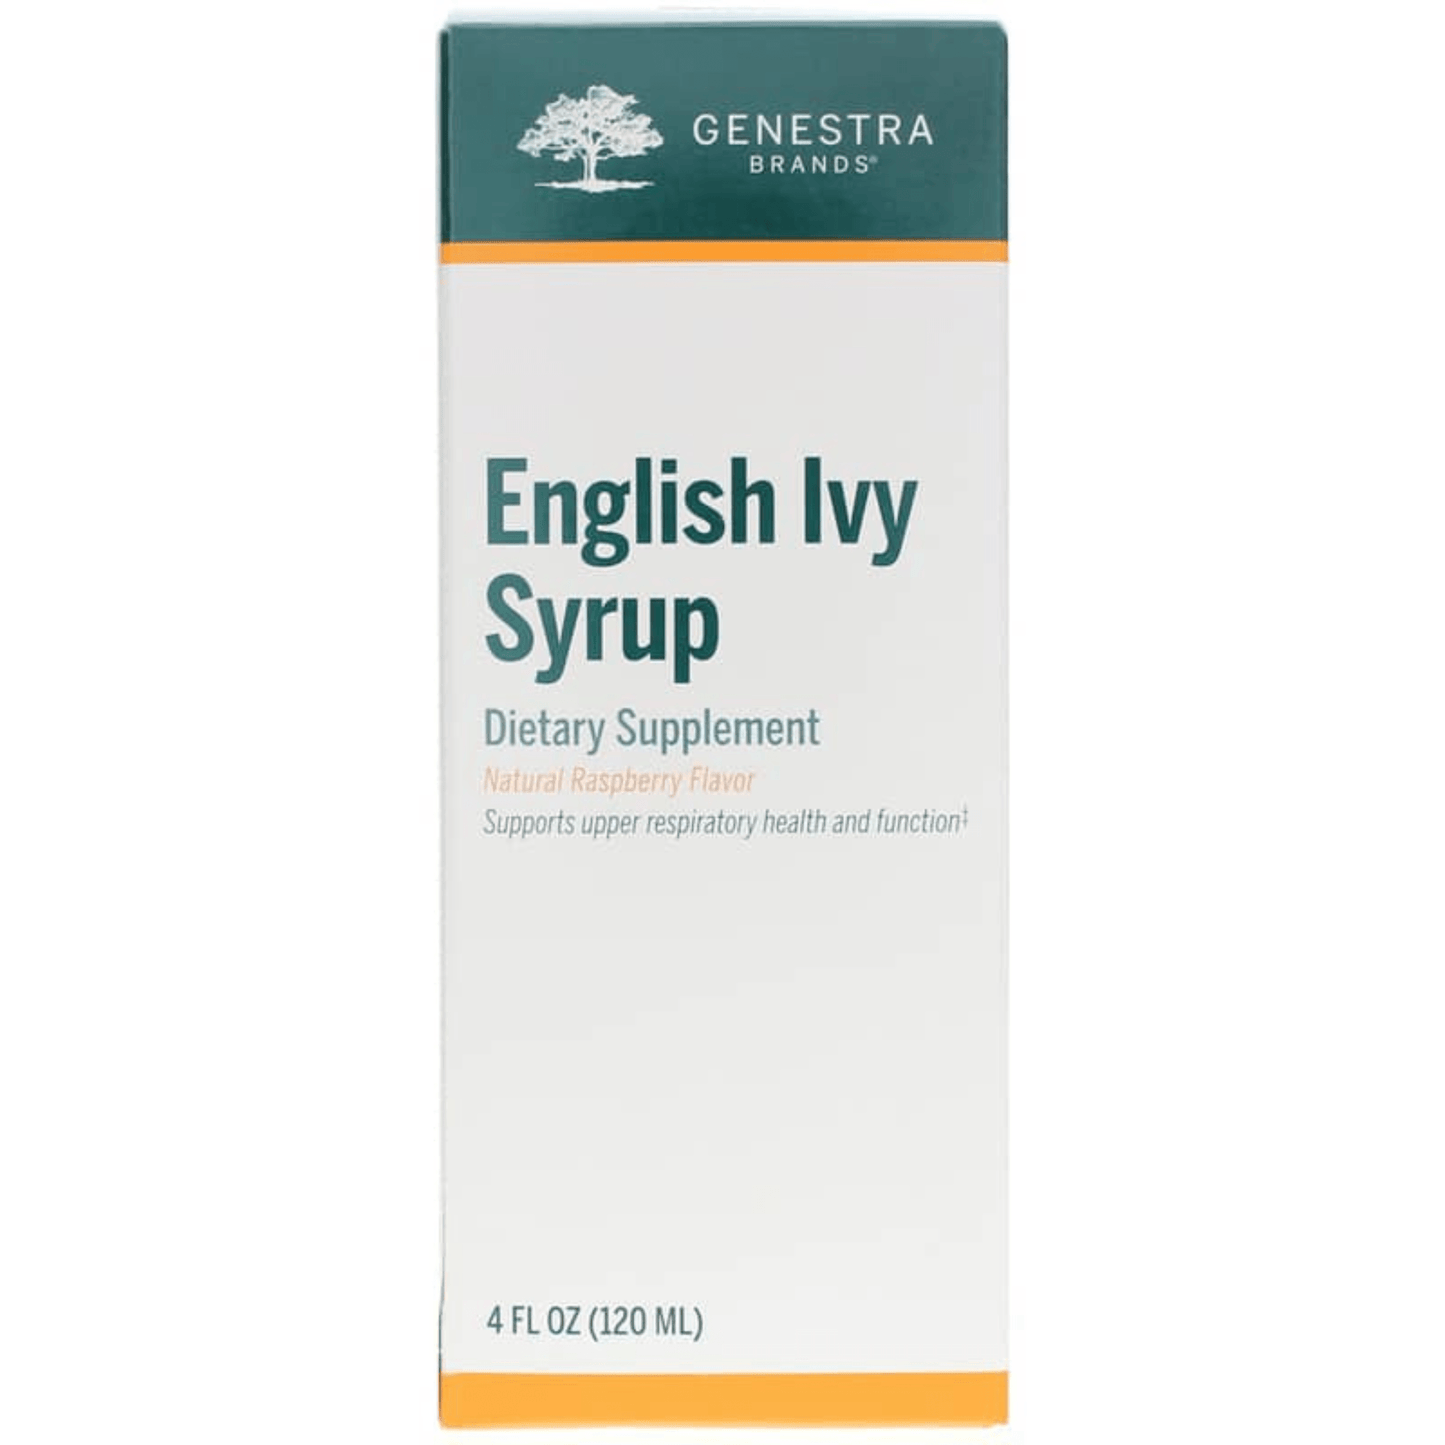 Primary Image of English Ivy Syrup Box Front